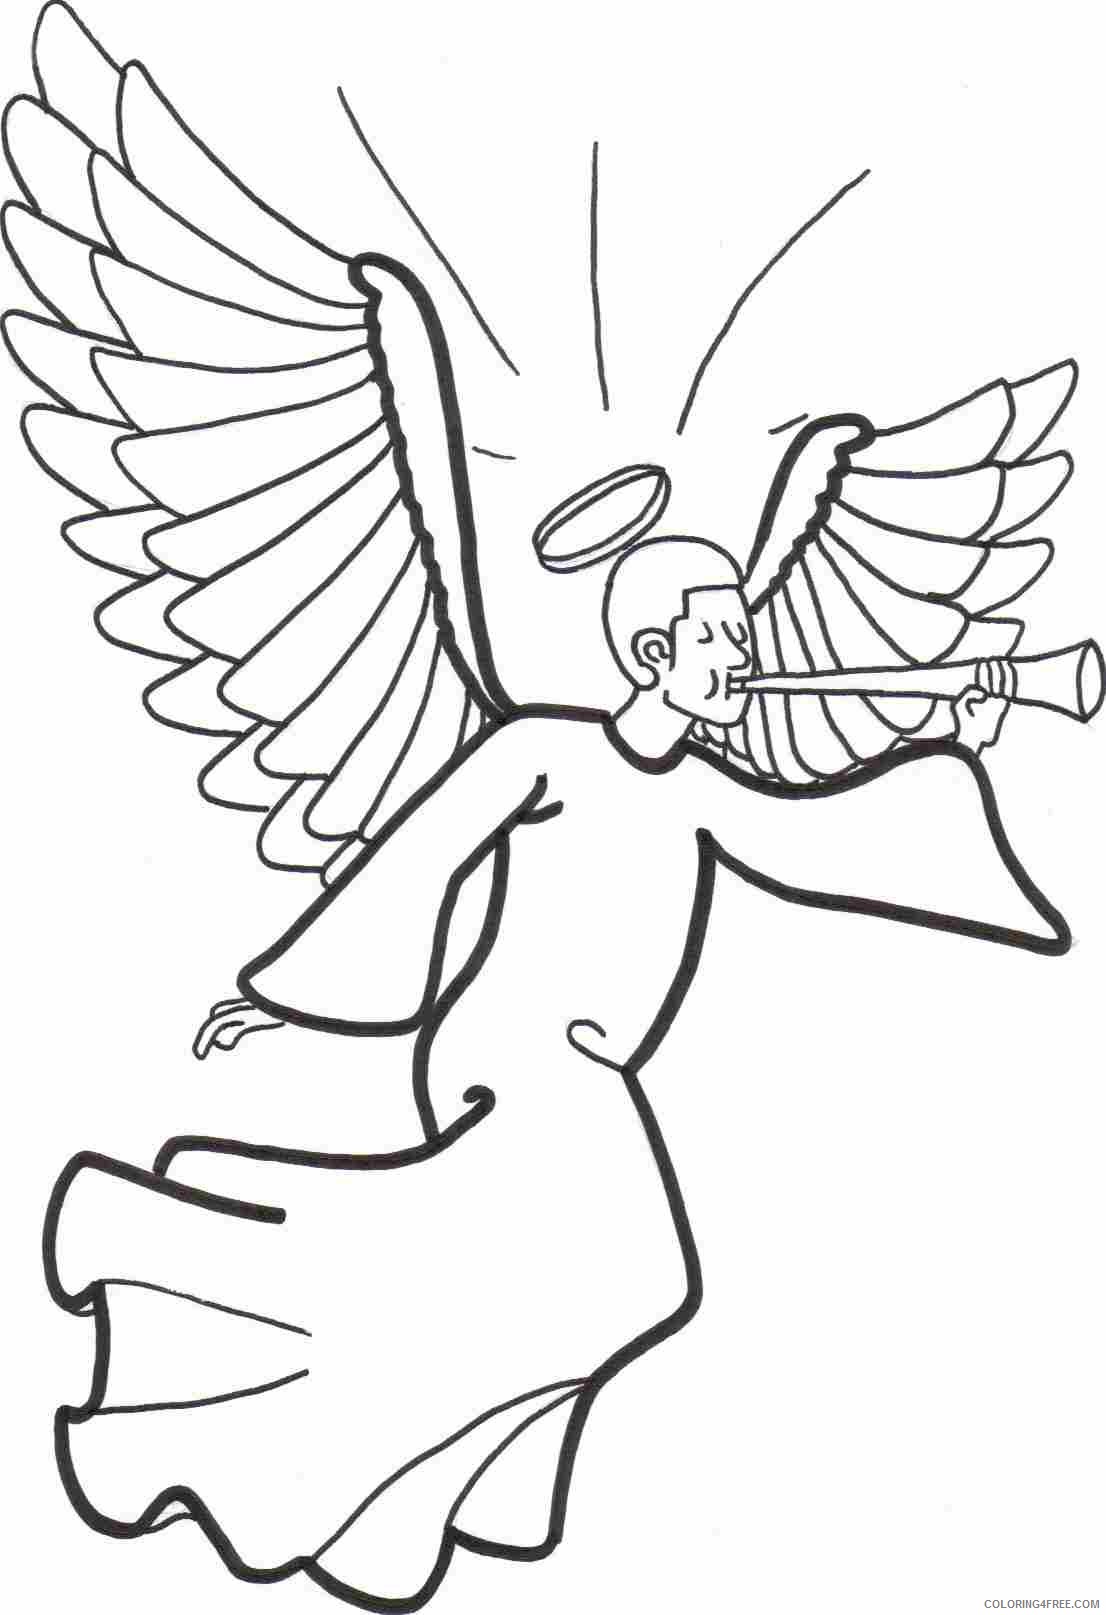 angel coloring pages with trumpet Coloring4free - Coloring4Free.com